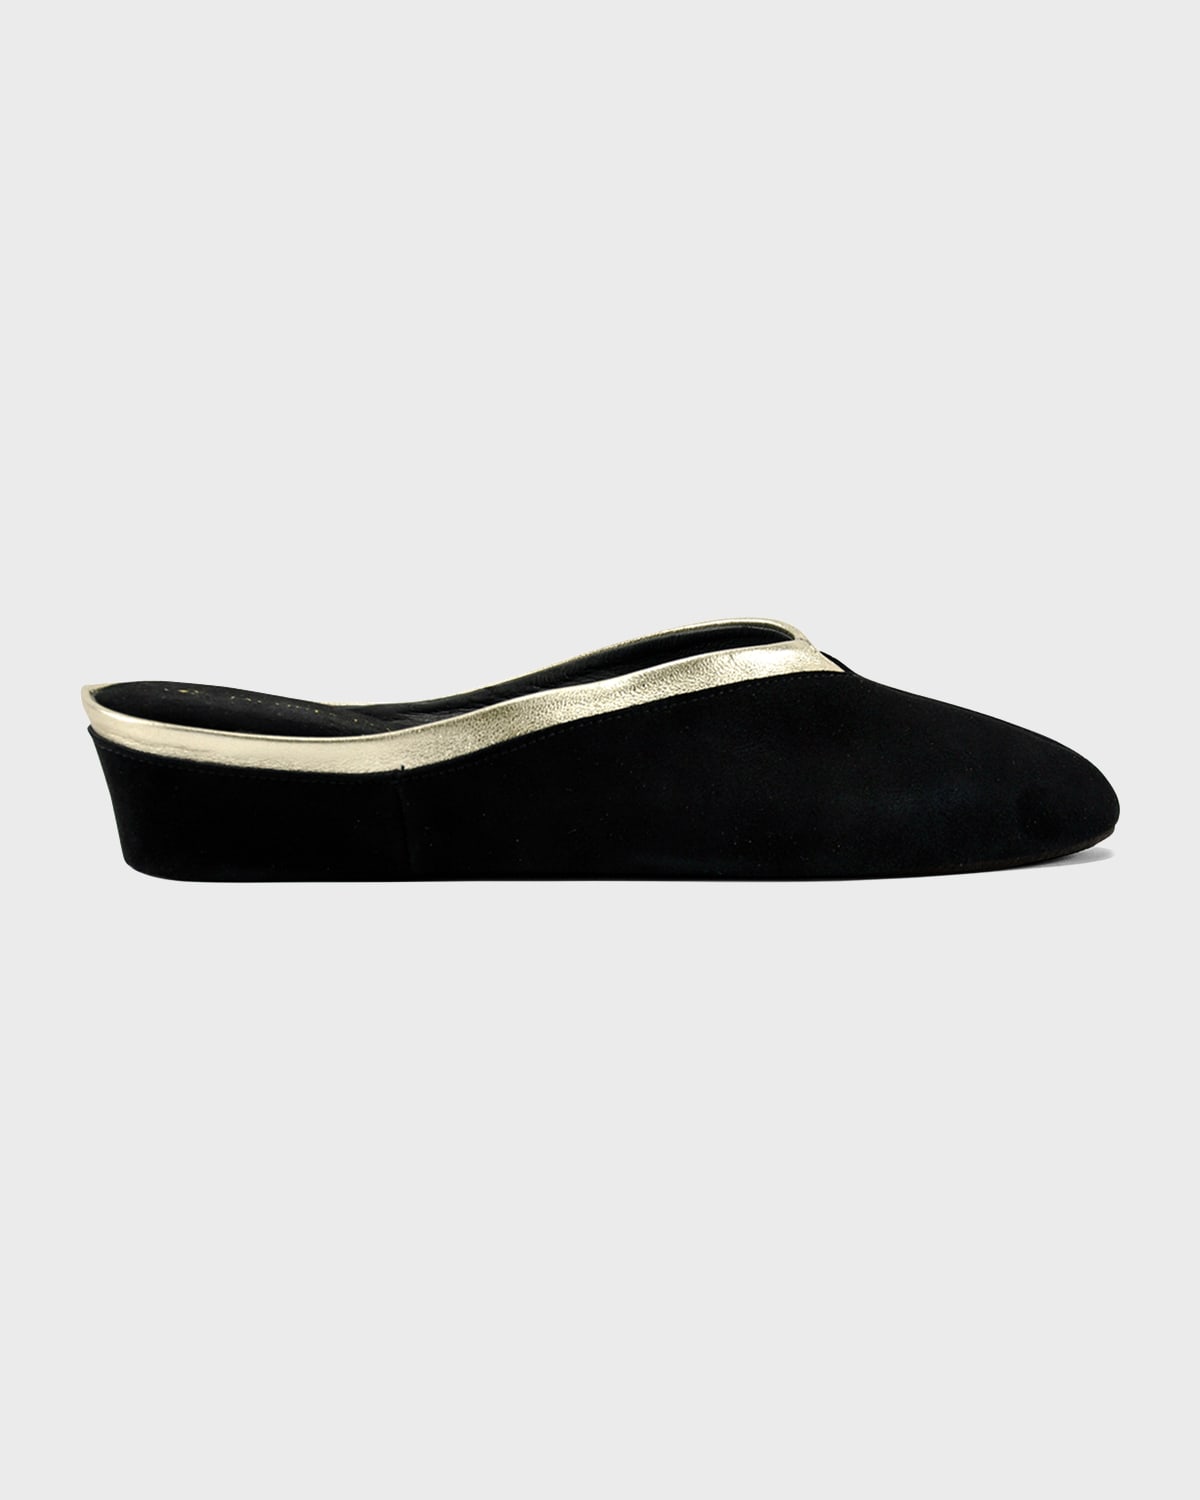 Jacques Levine Suede Wedge Mule Slippers